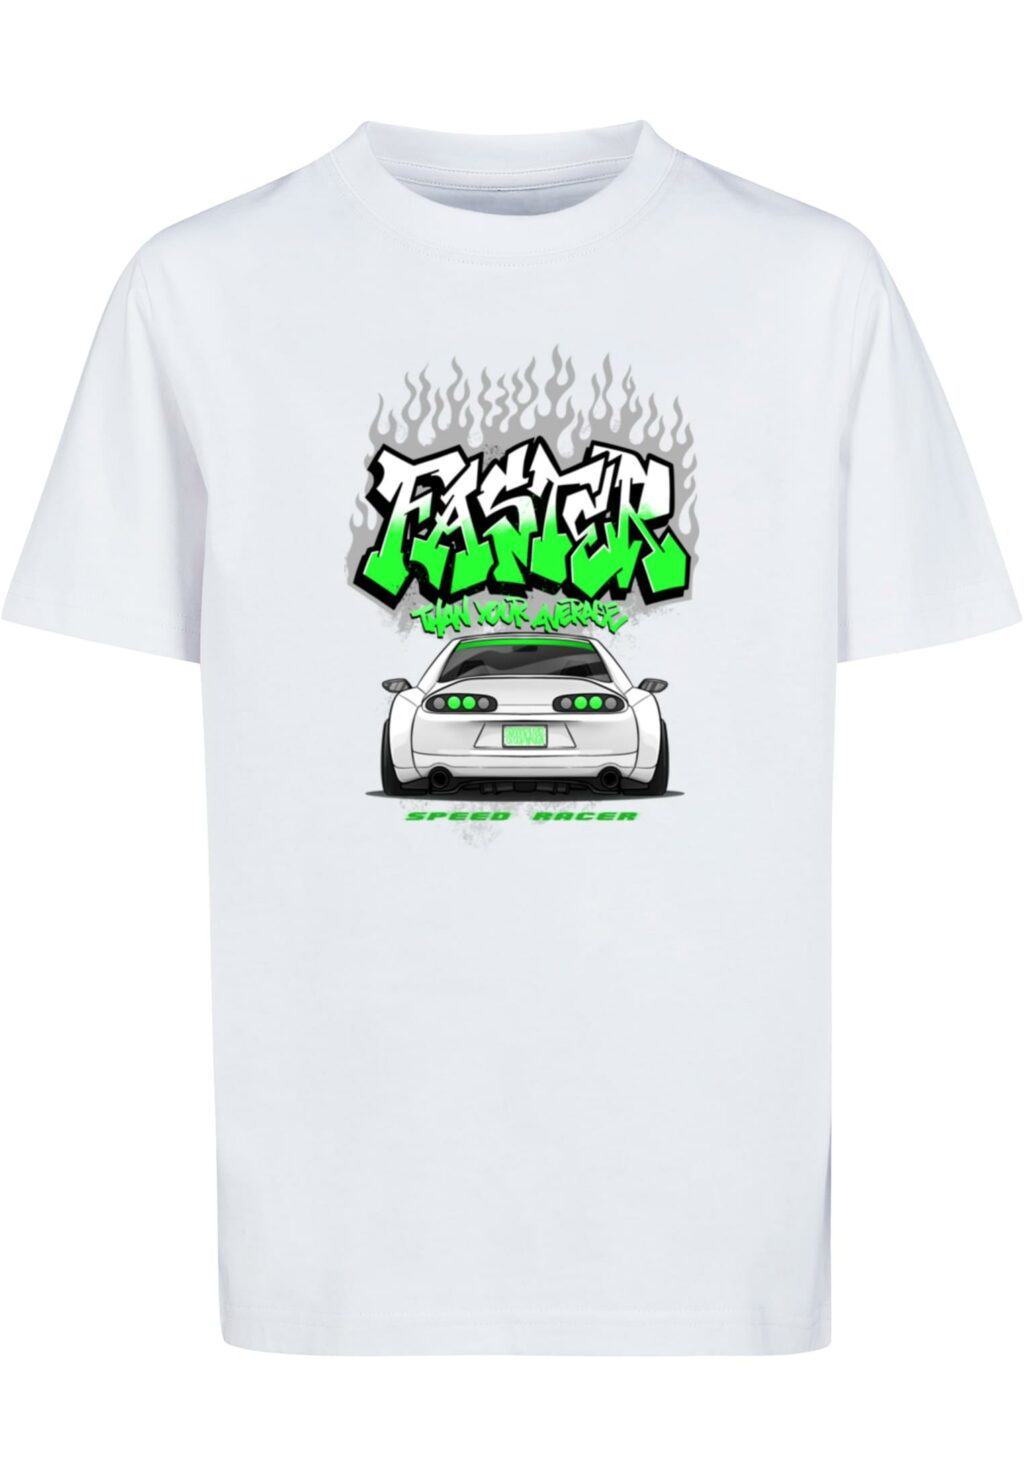 Kids Faster Than Your Average Tee white MTK257